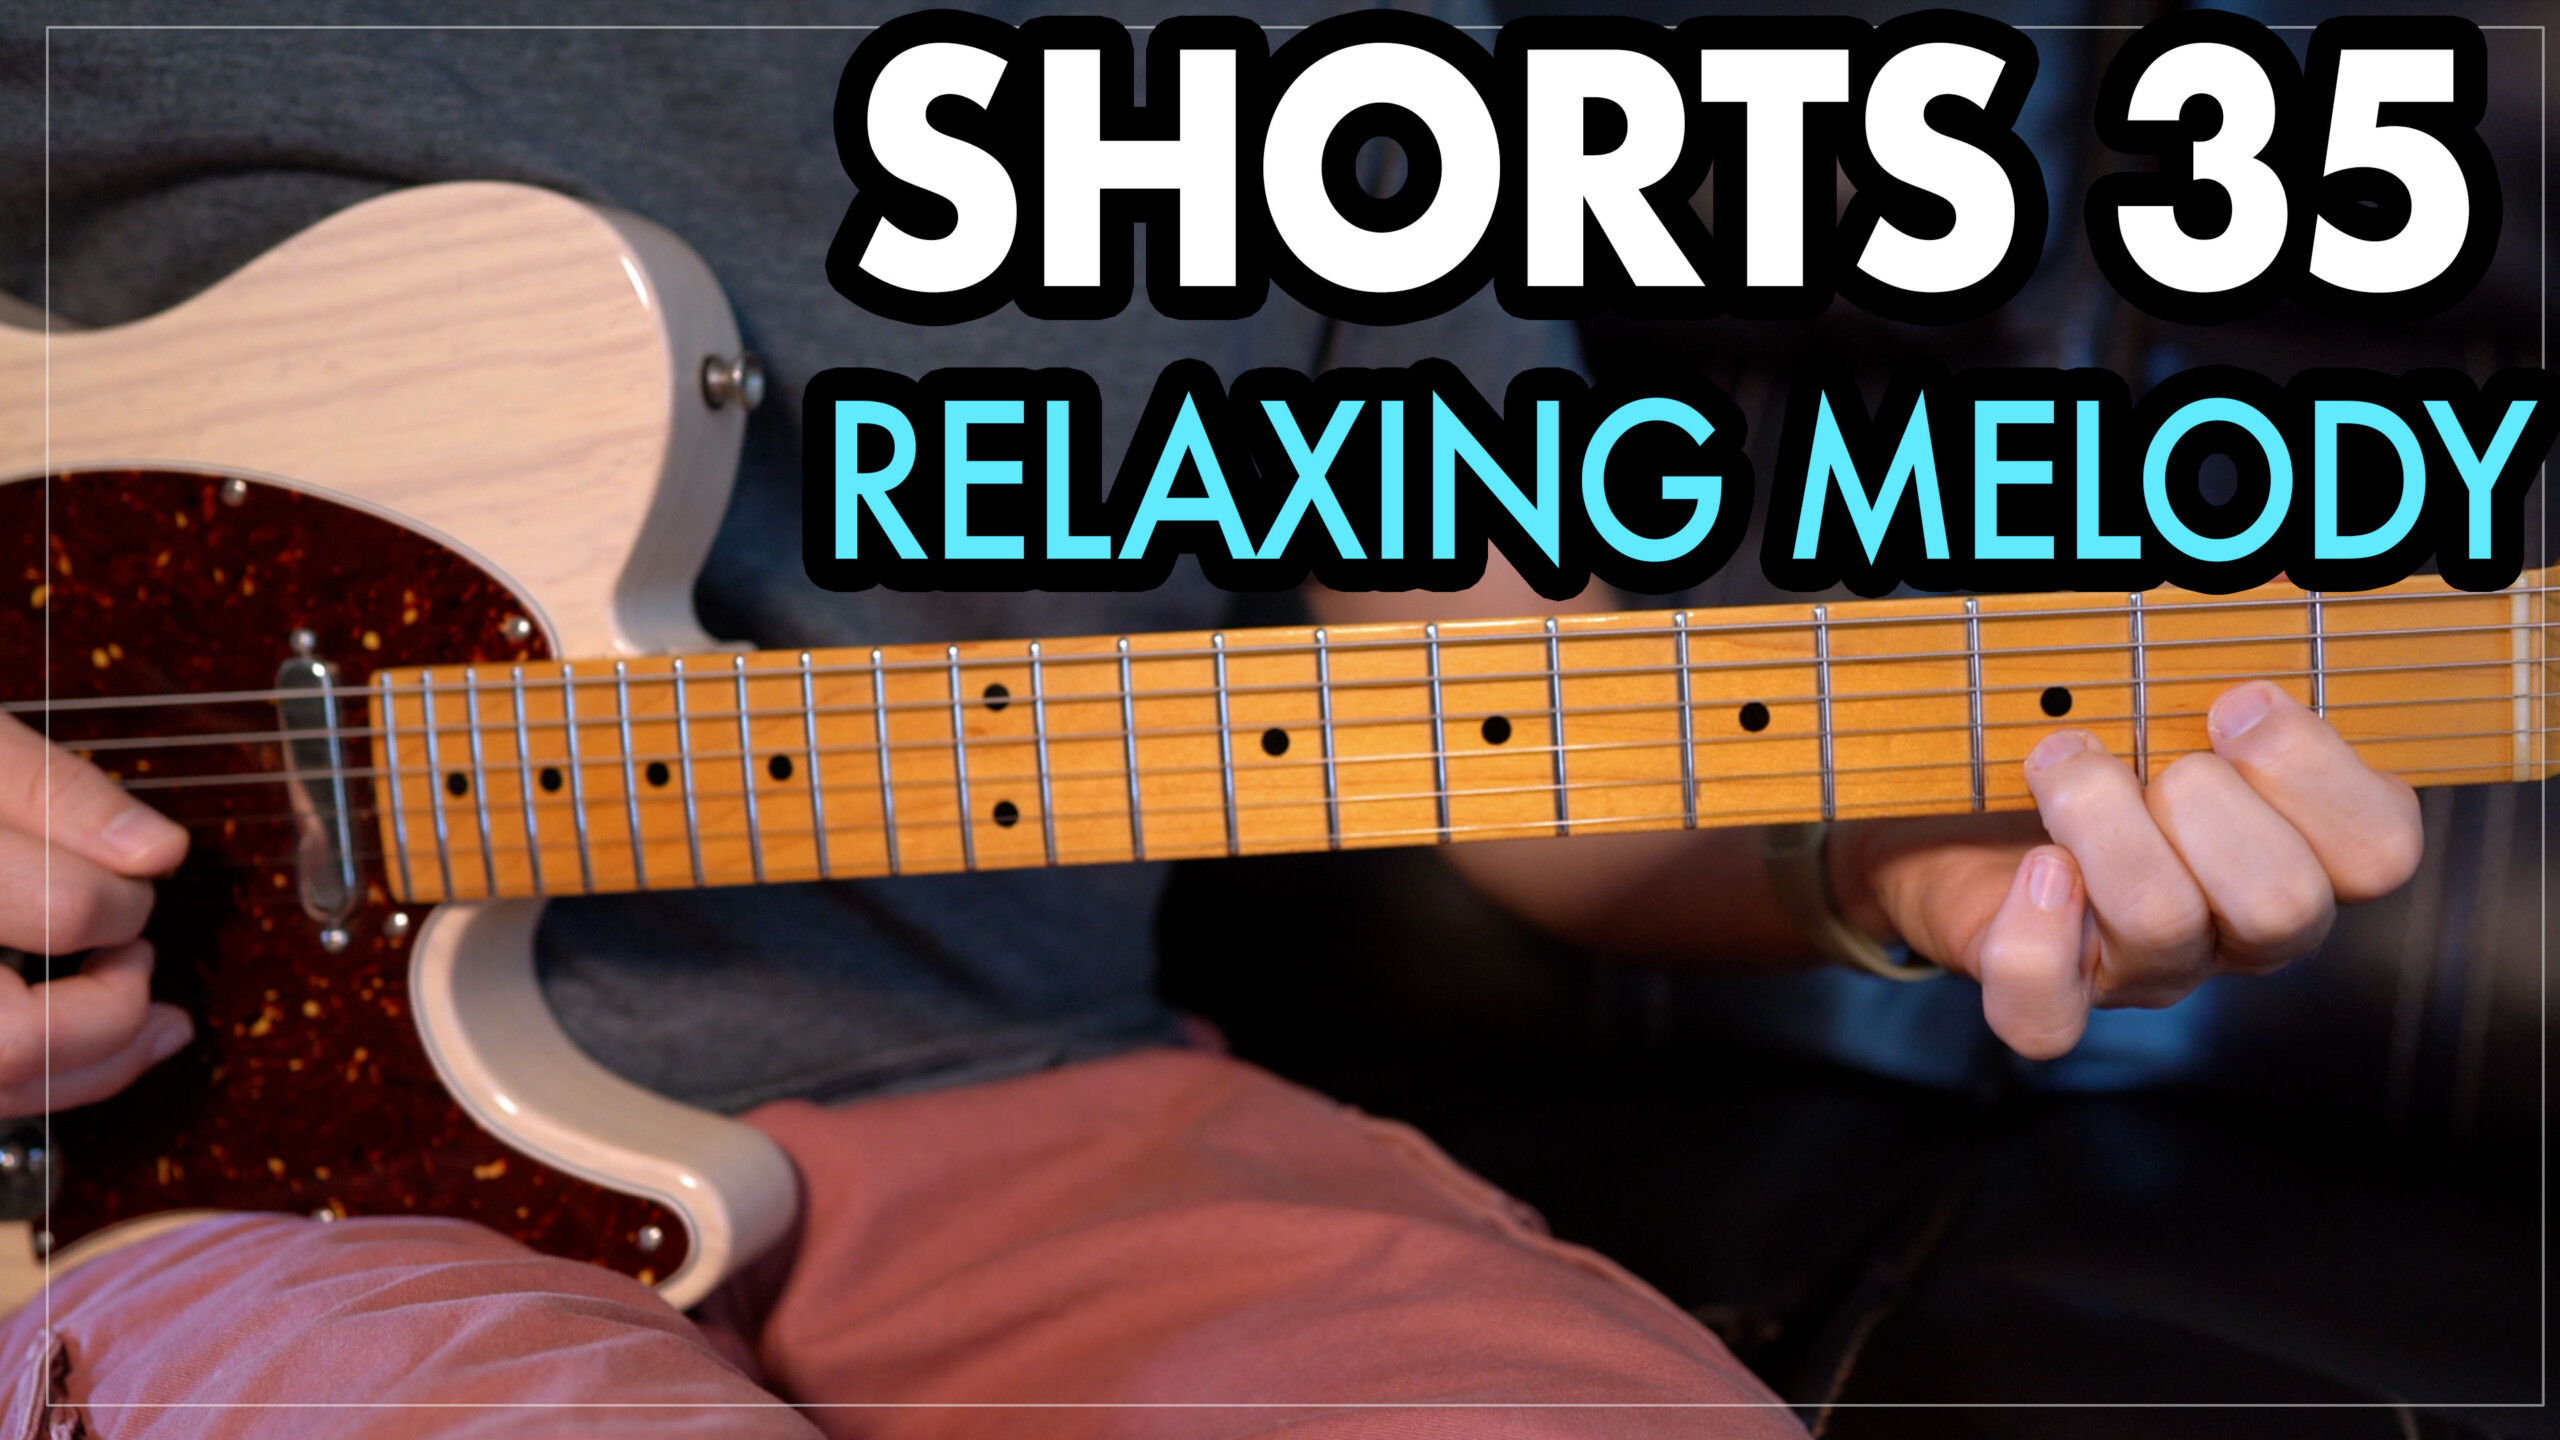 MicroLesson: 100 – Relaxing Melody